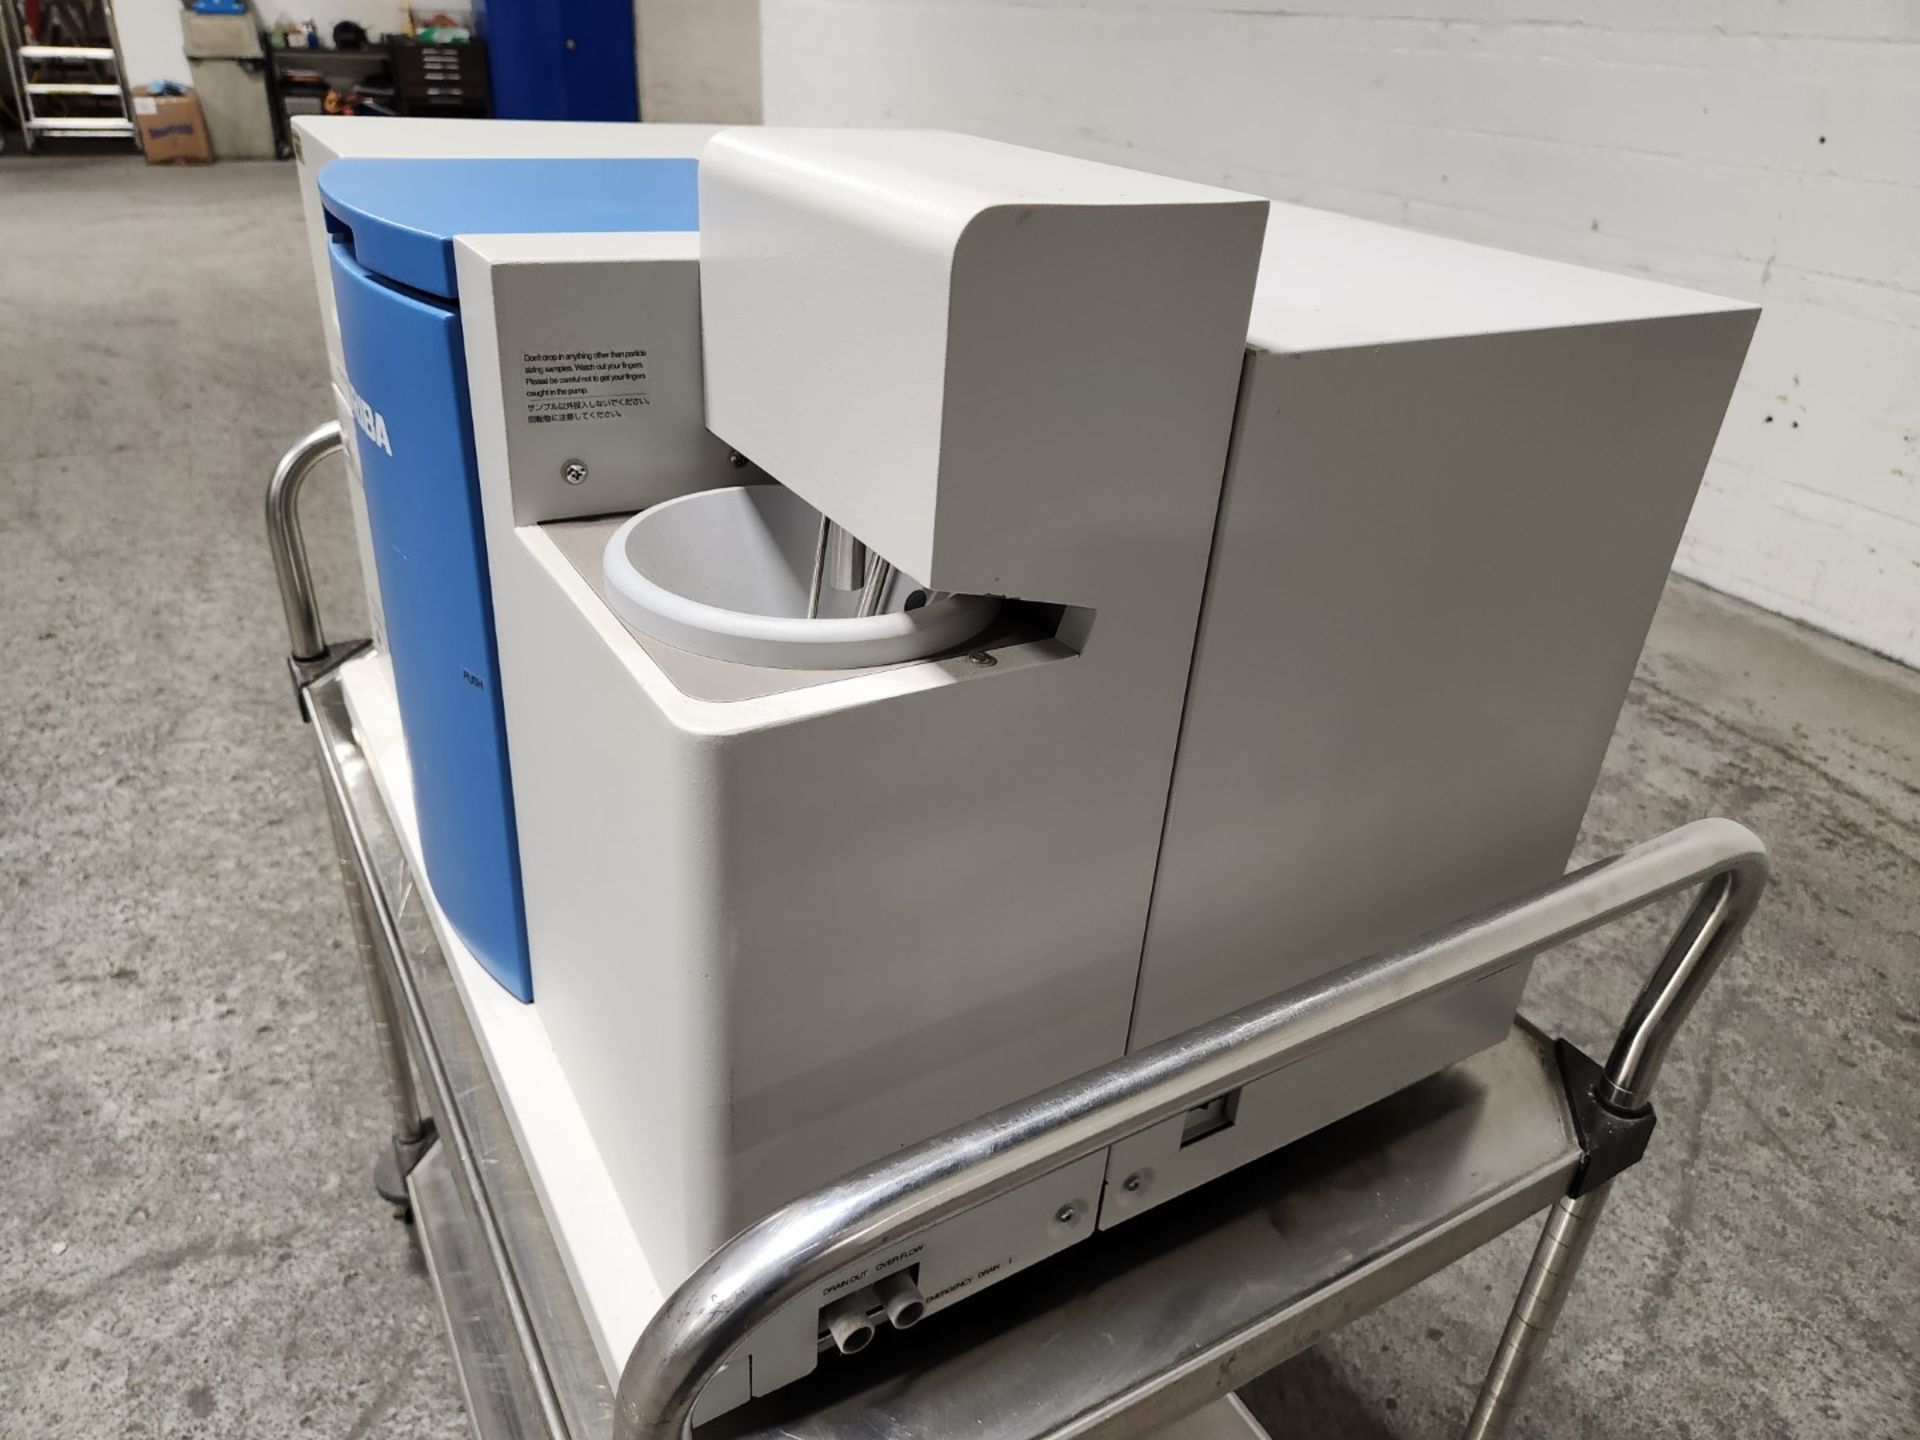 Horiba Partica Model LA-950 Laser Scattering Particle Size Distribution Analyzer, with manual and - Image 5 of 13